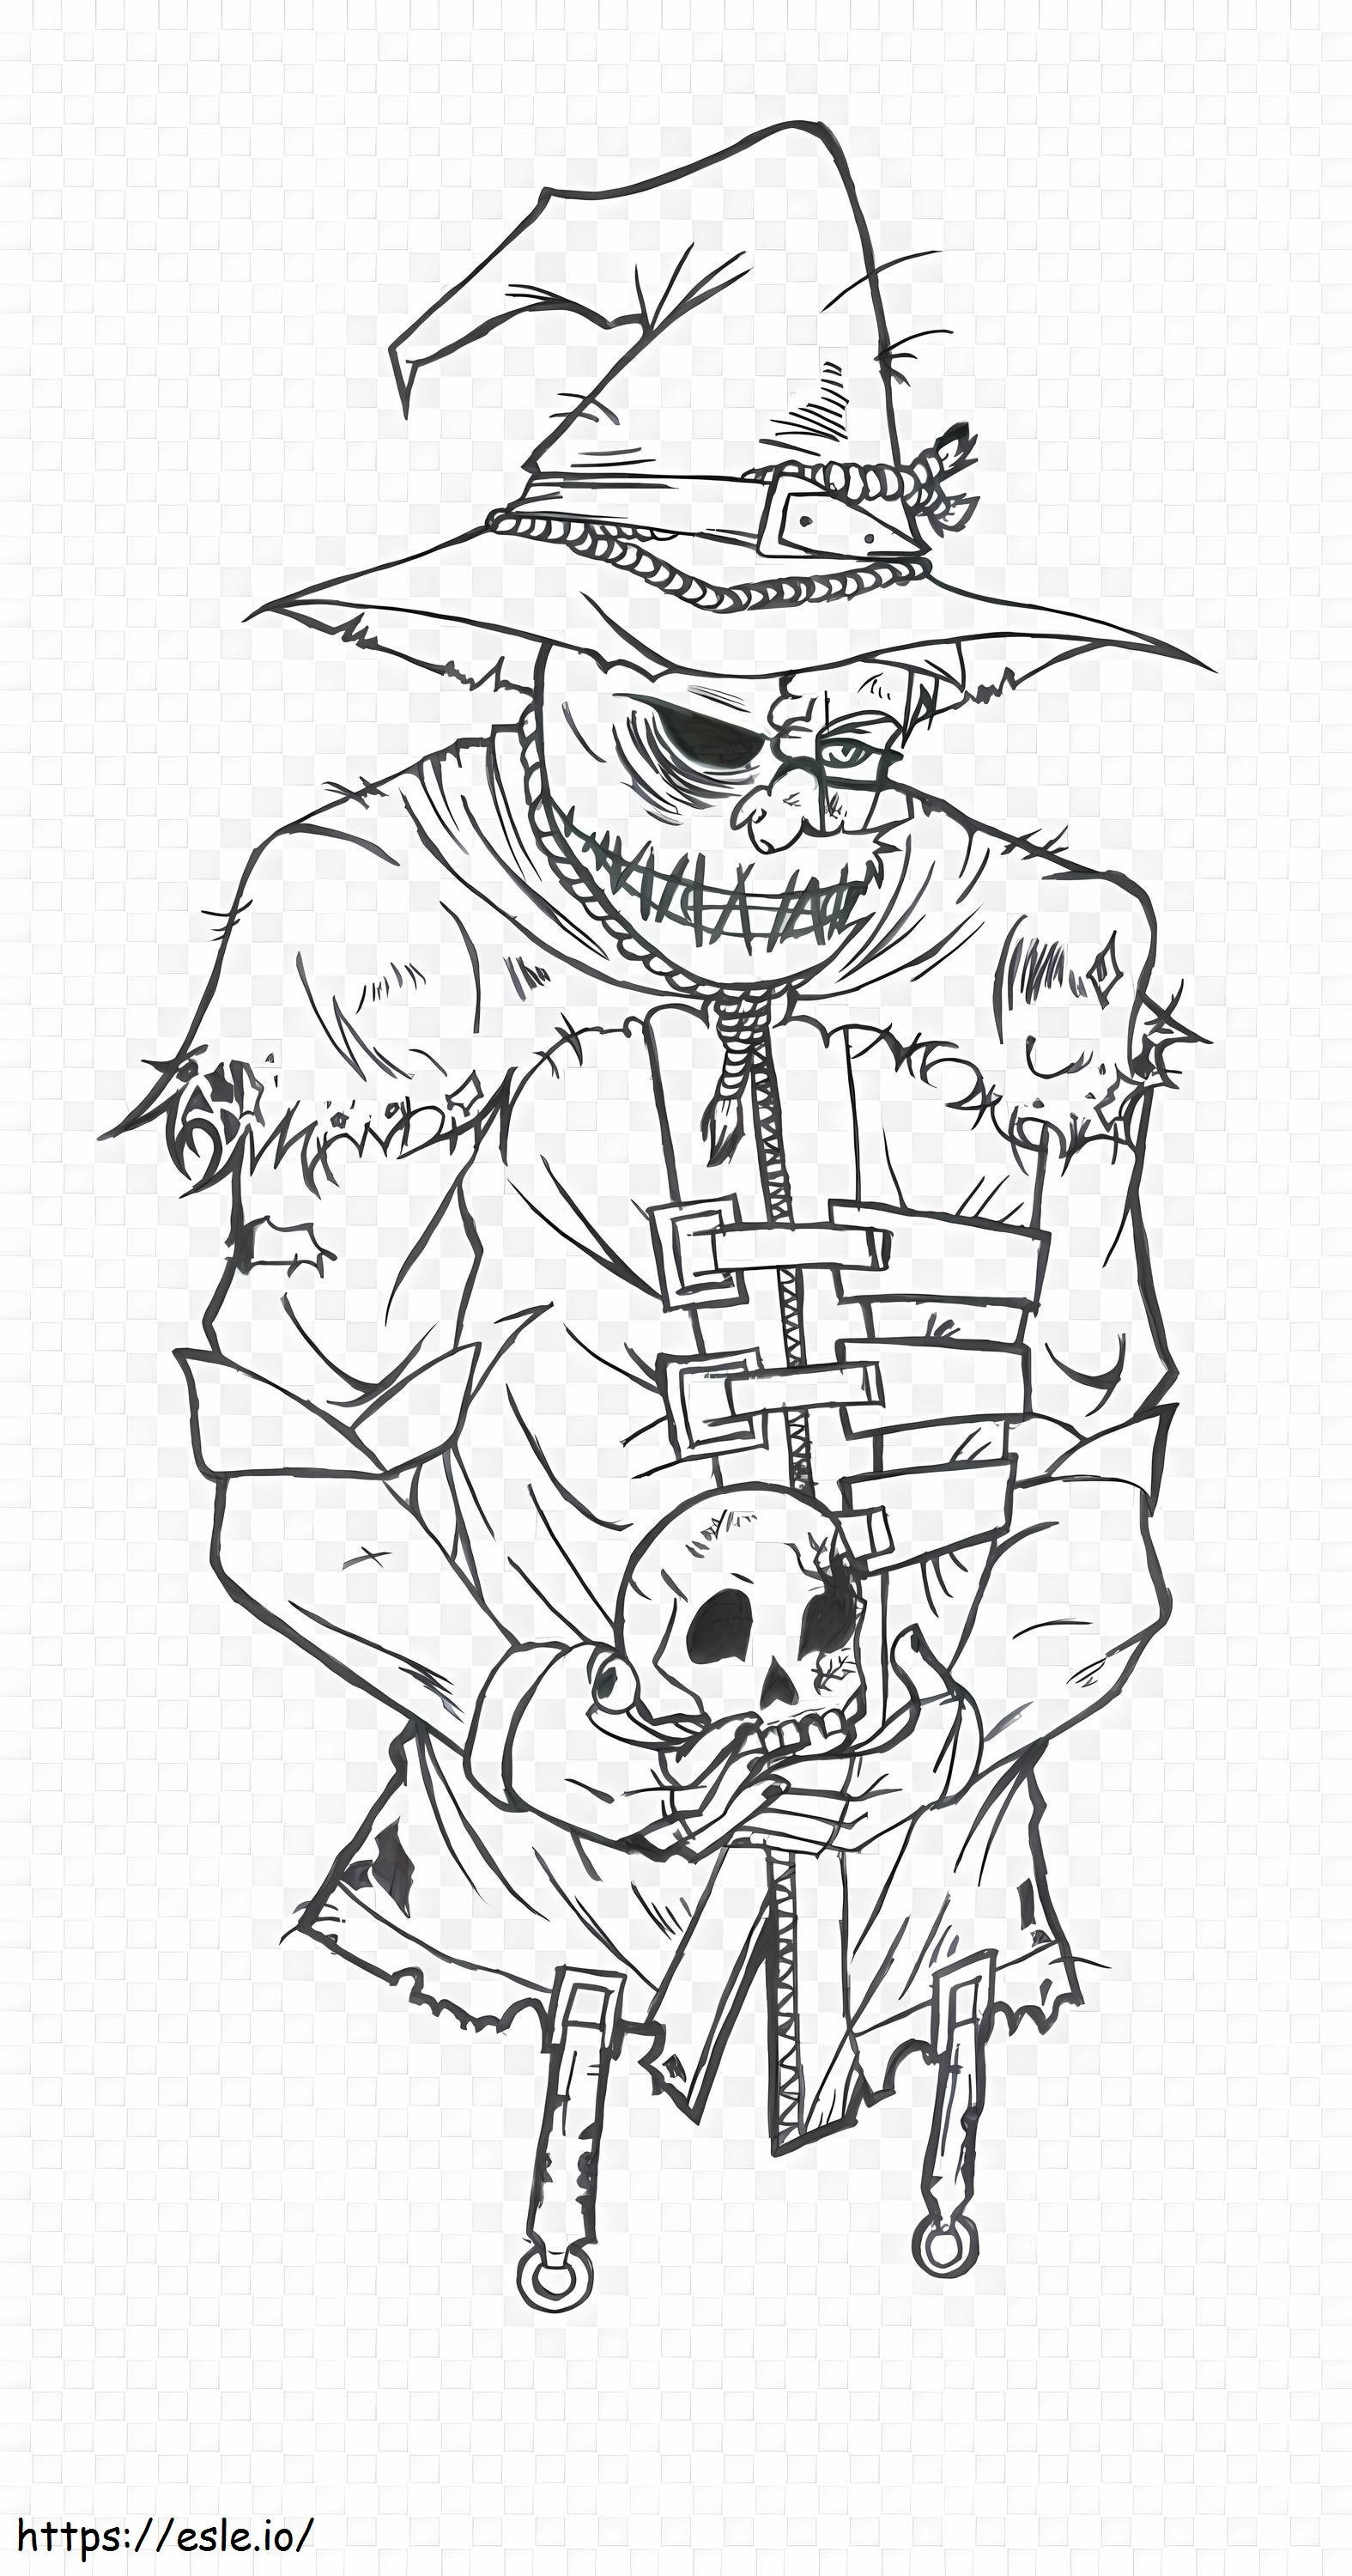 Scarecrow Holding Skull coloring page